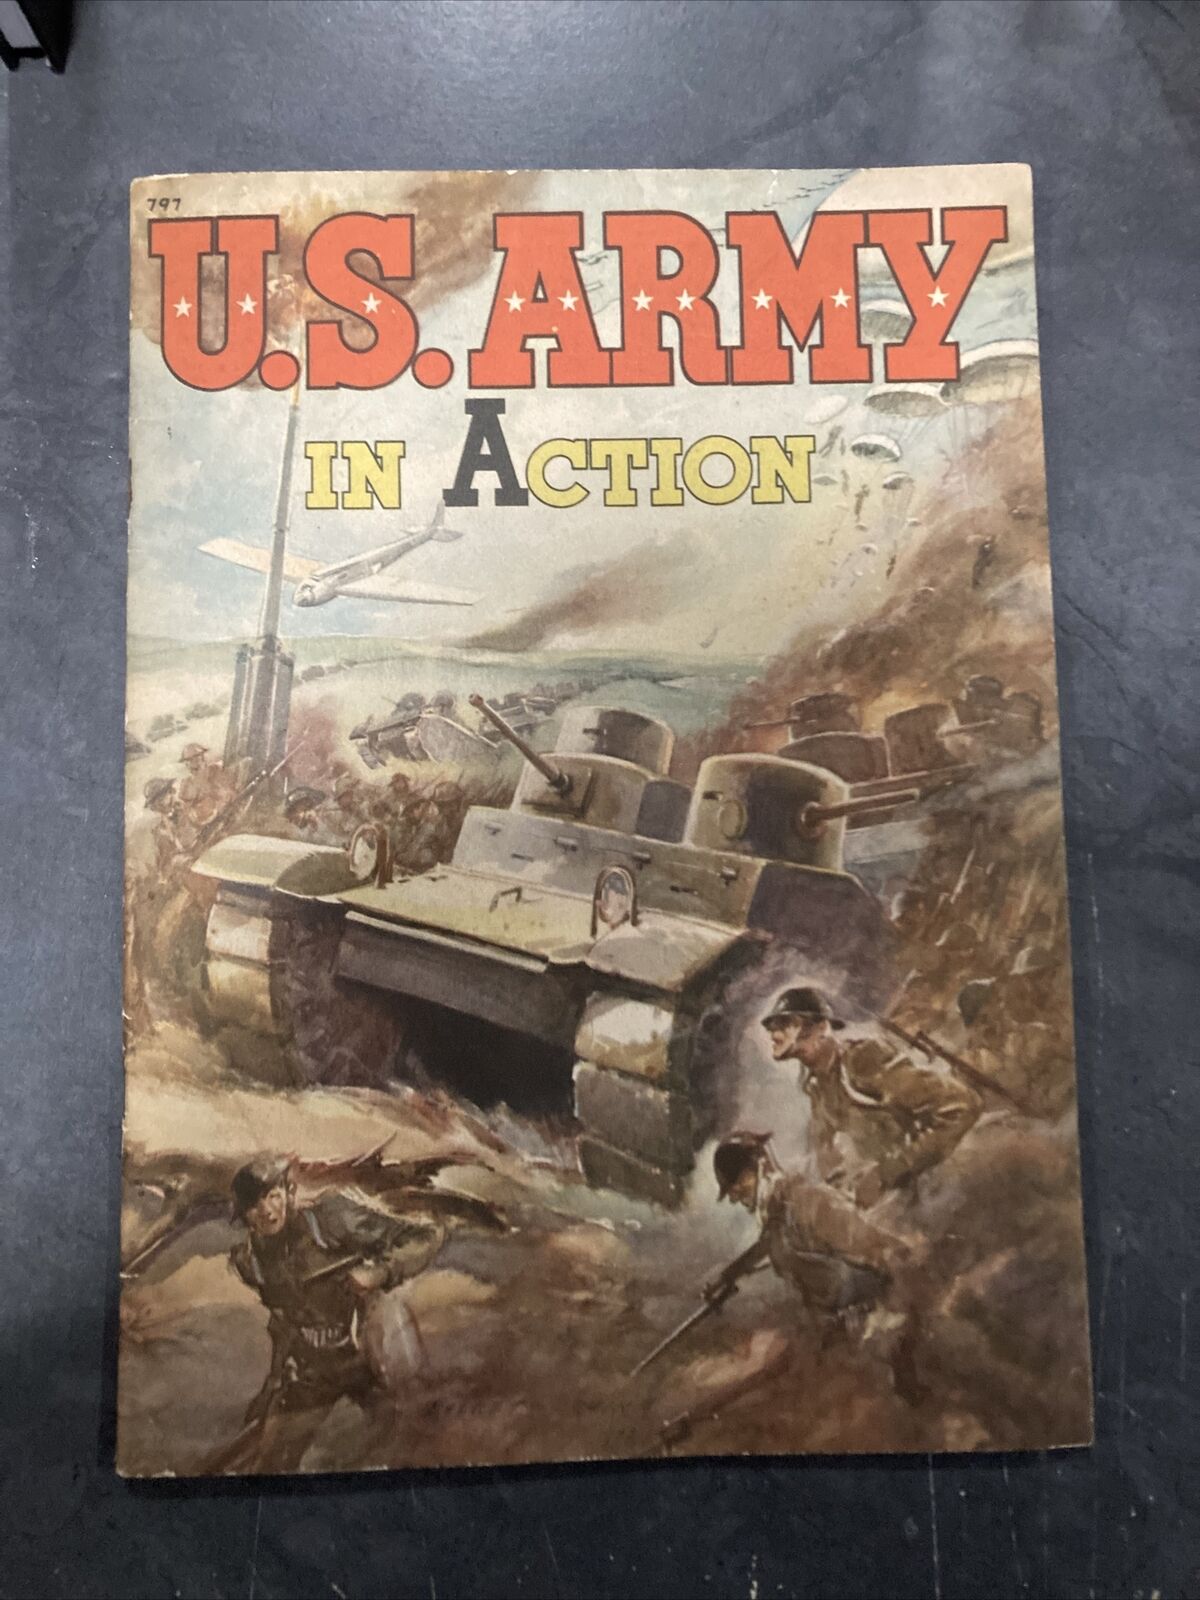 Vintage US Army In Action 1942 Whitman #797 WW2 Tanks Planes War